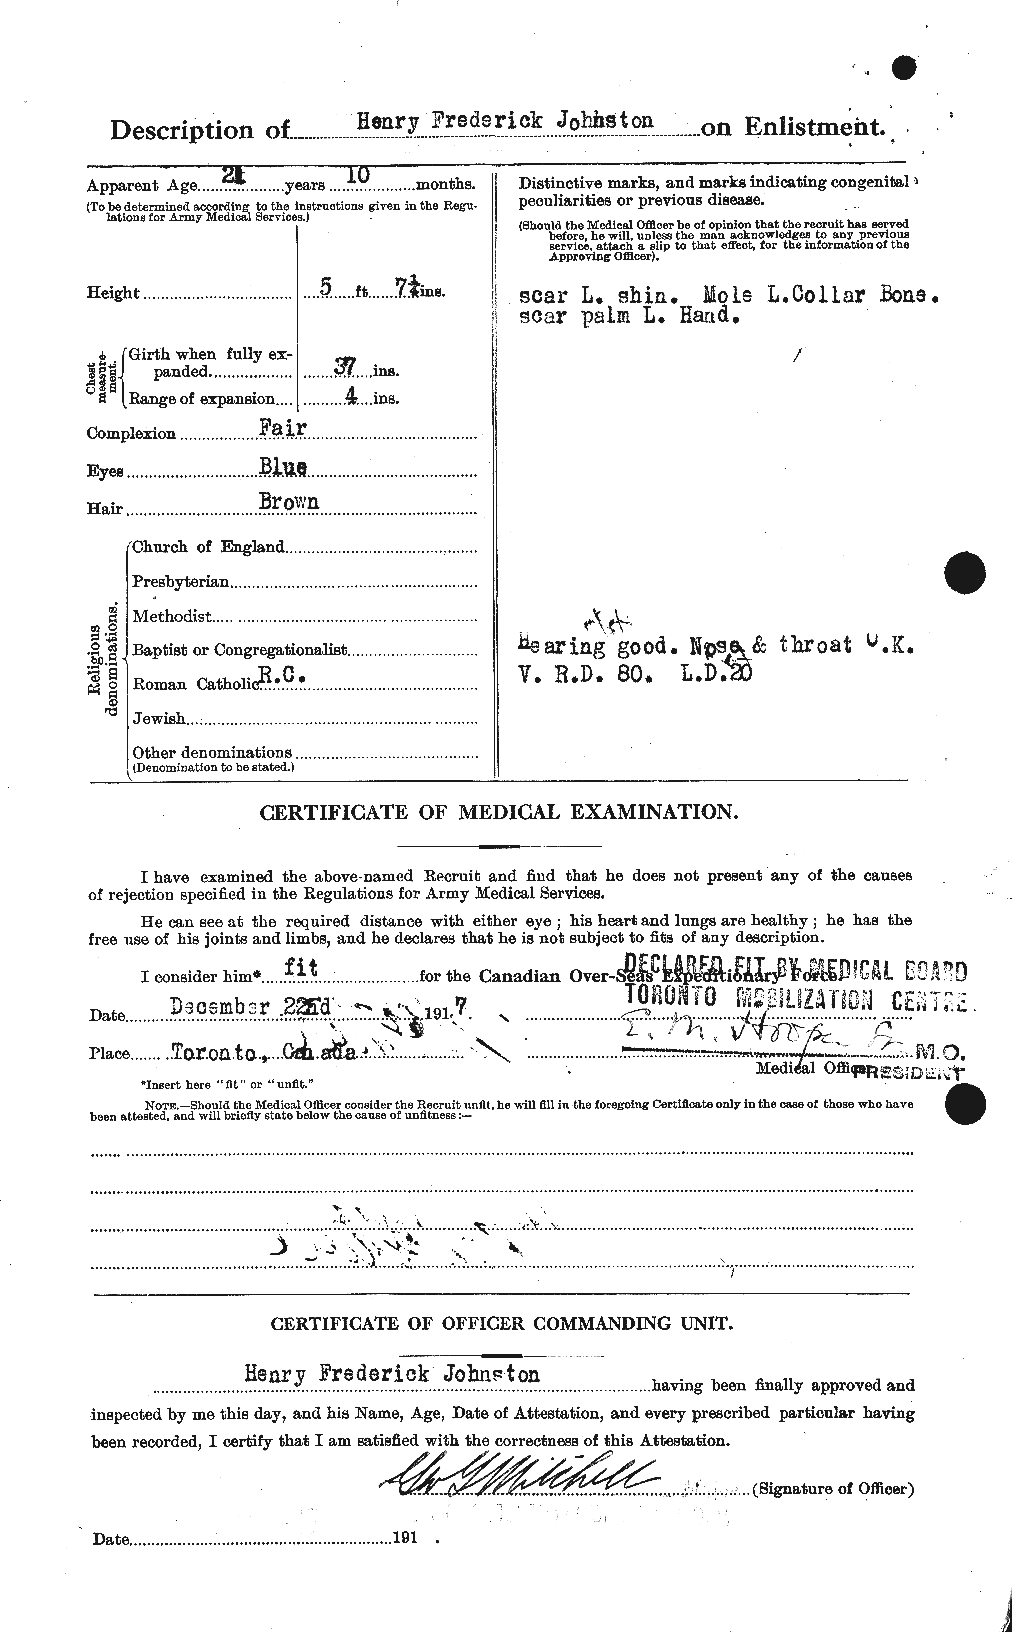 Personnel Records of the First World War - CEF 419541b